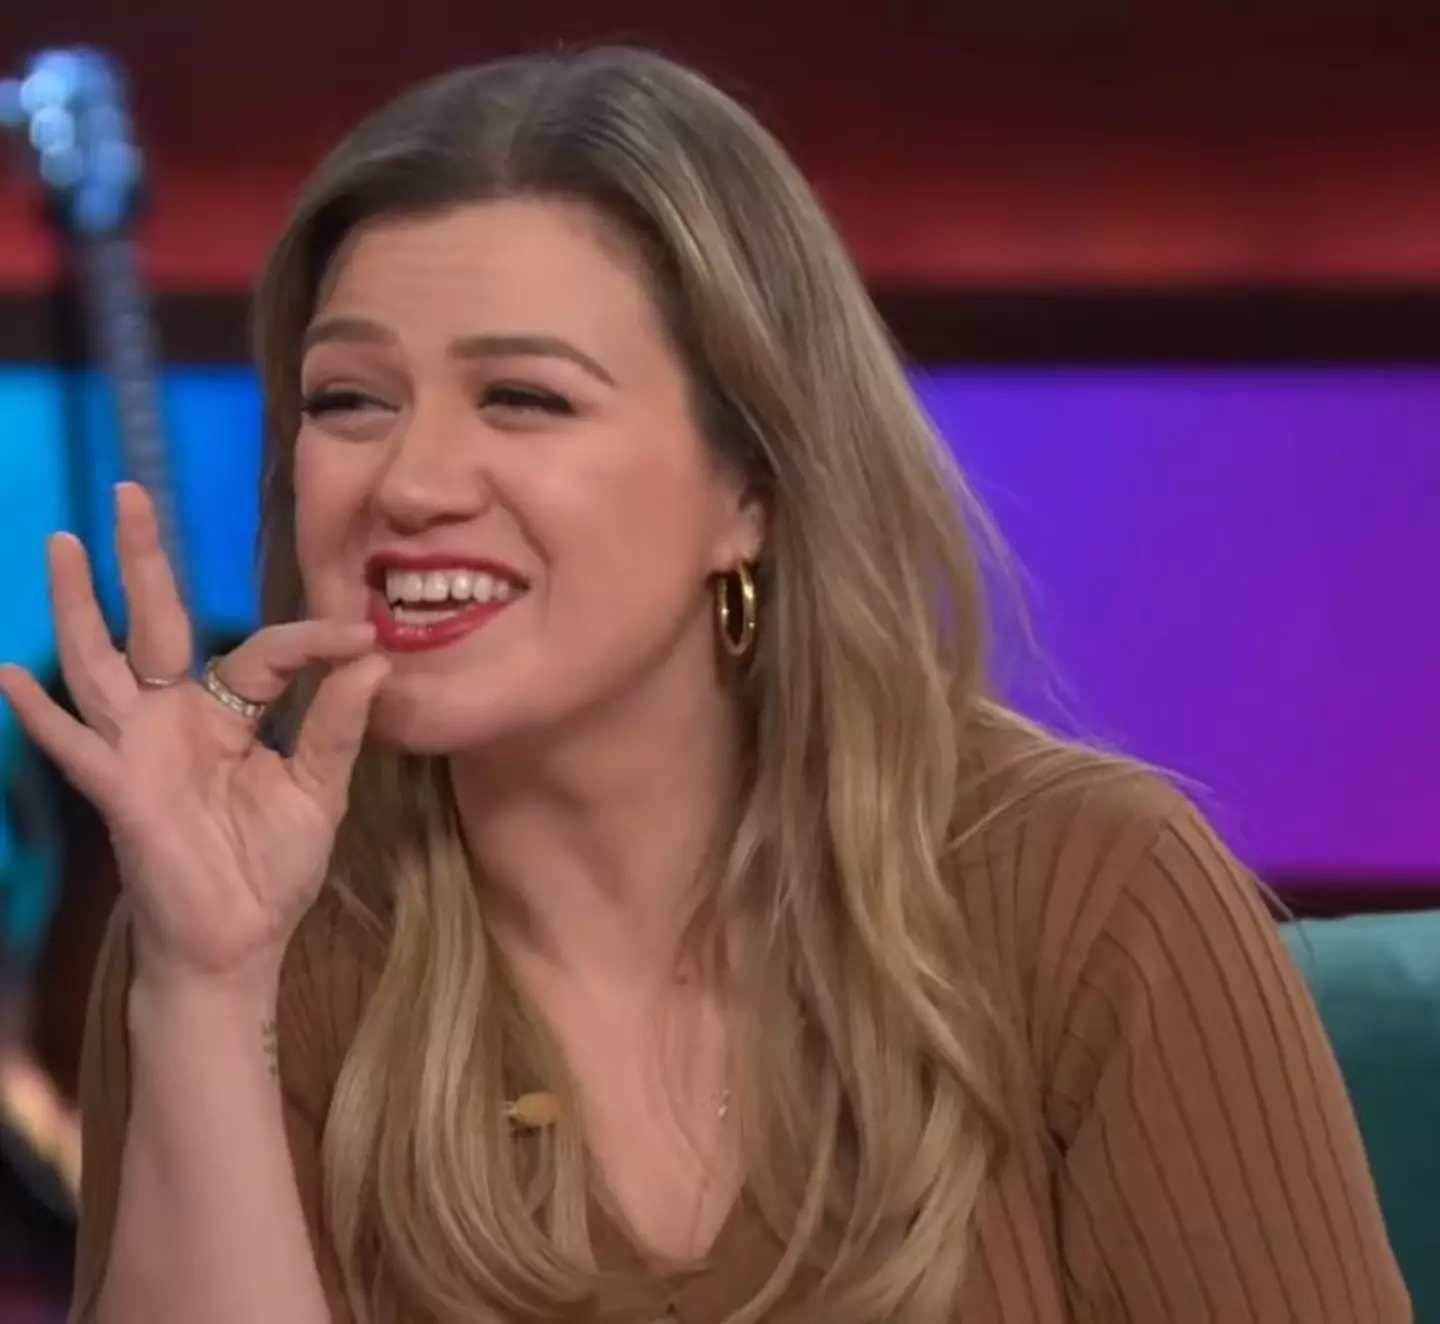 Kelly Clarkson claimed that the star's transformation was 'slight'.